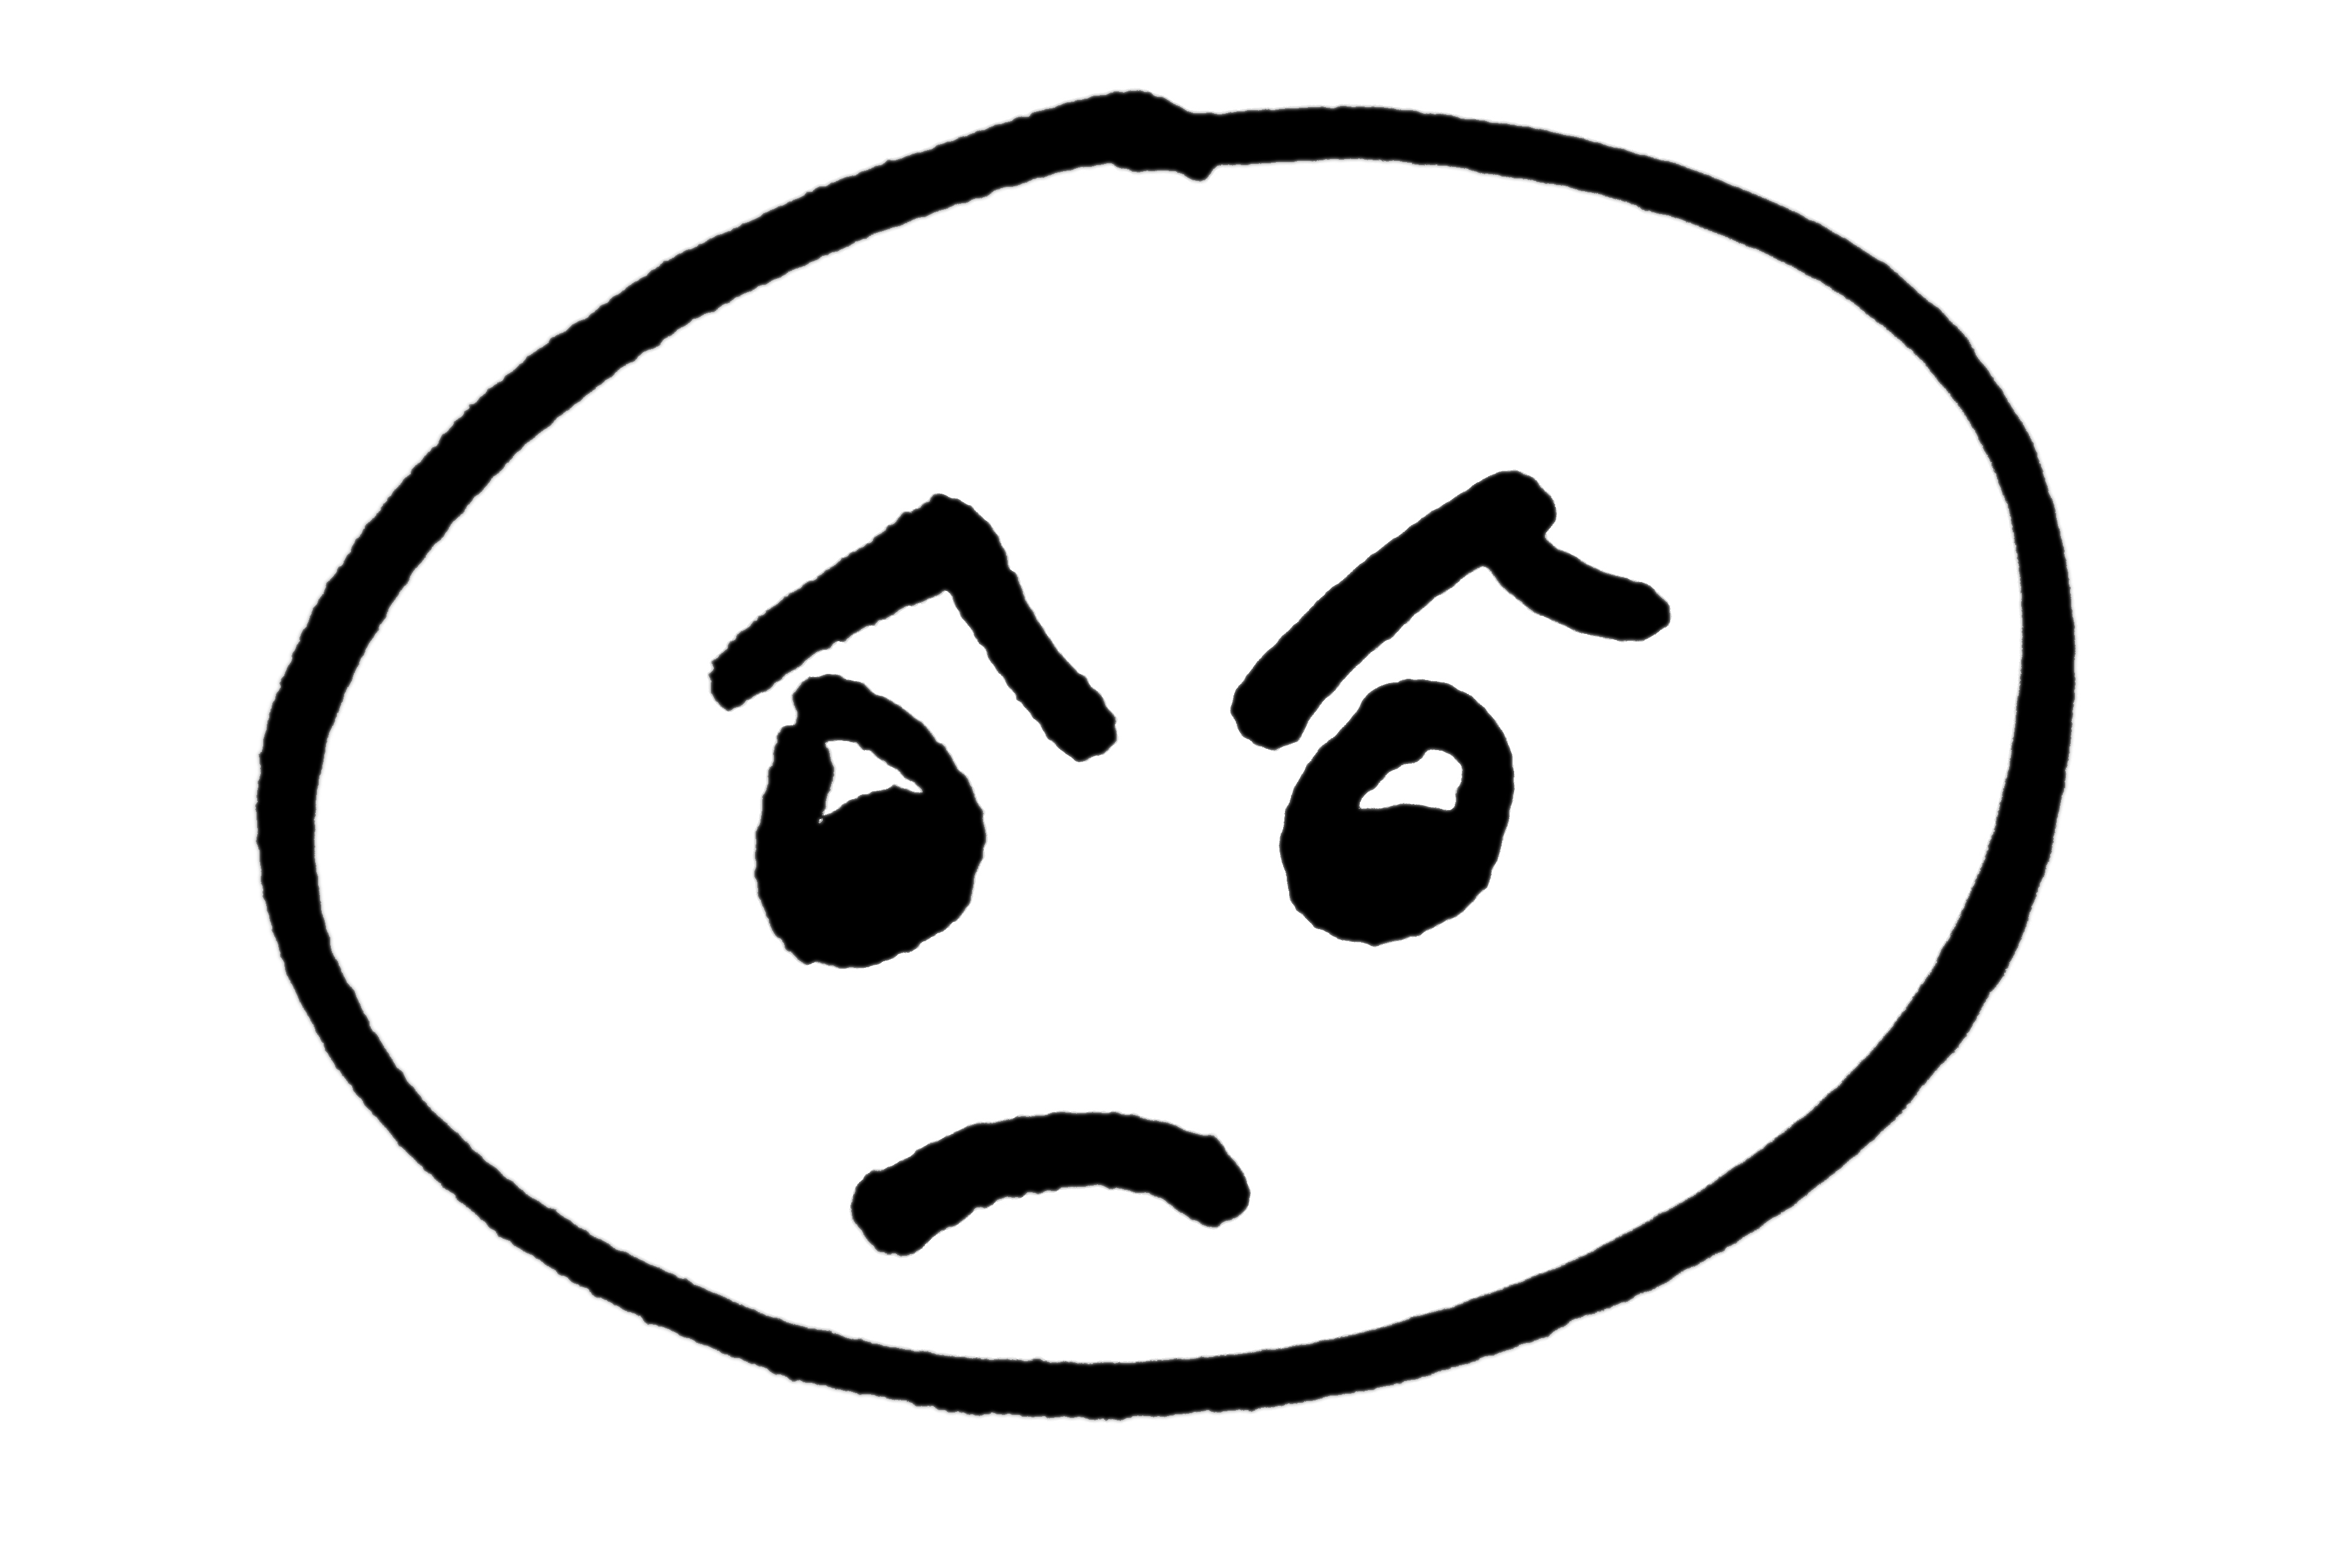 Mad face angry face clip art 